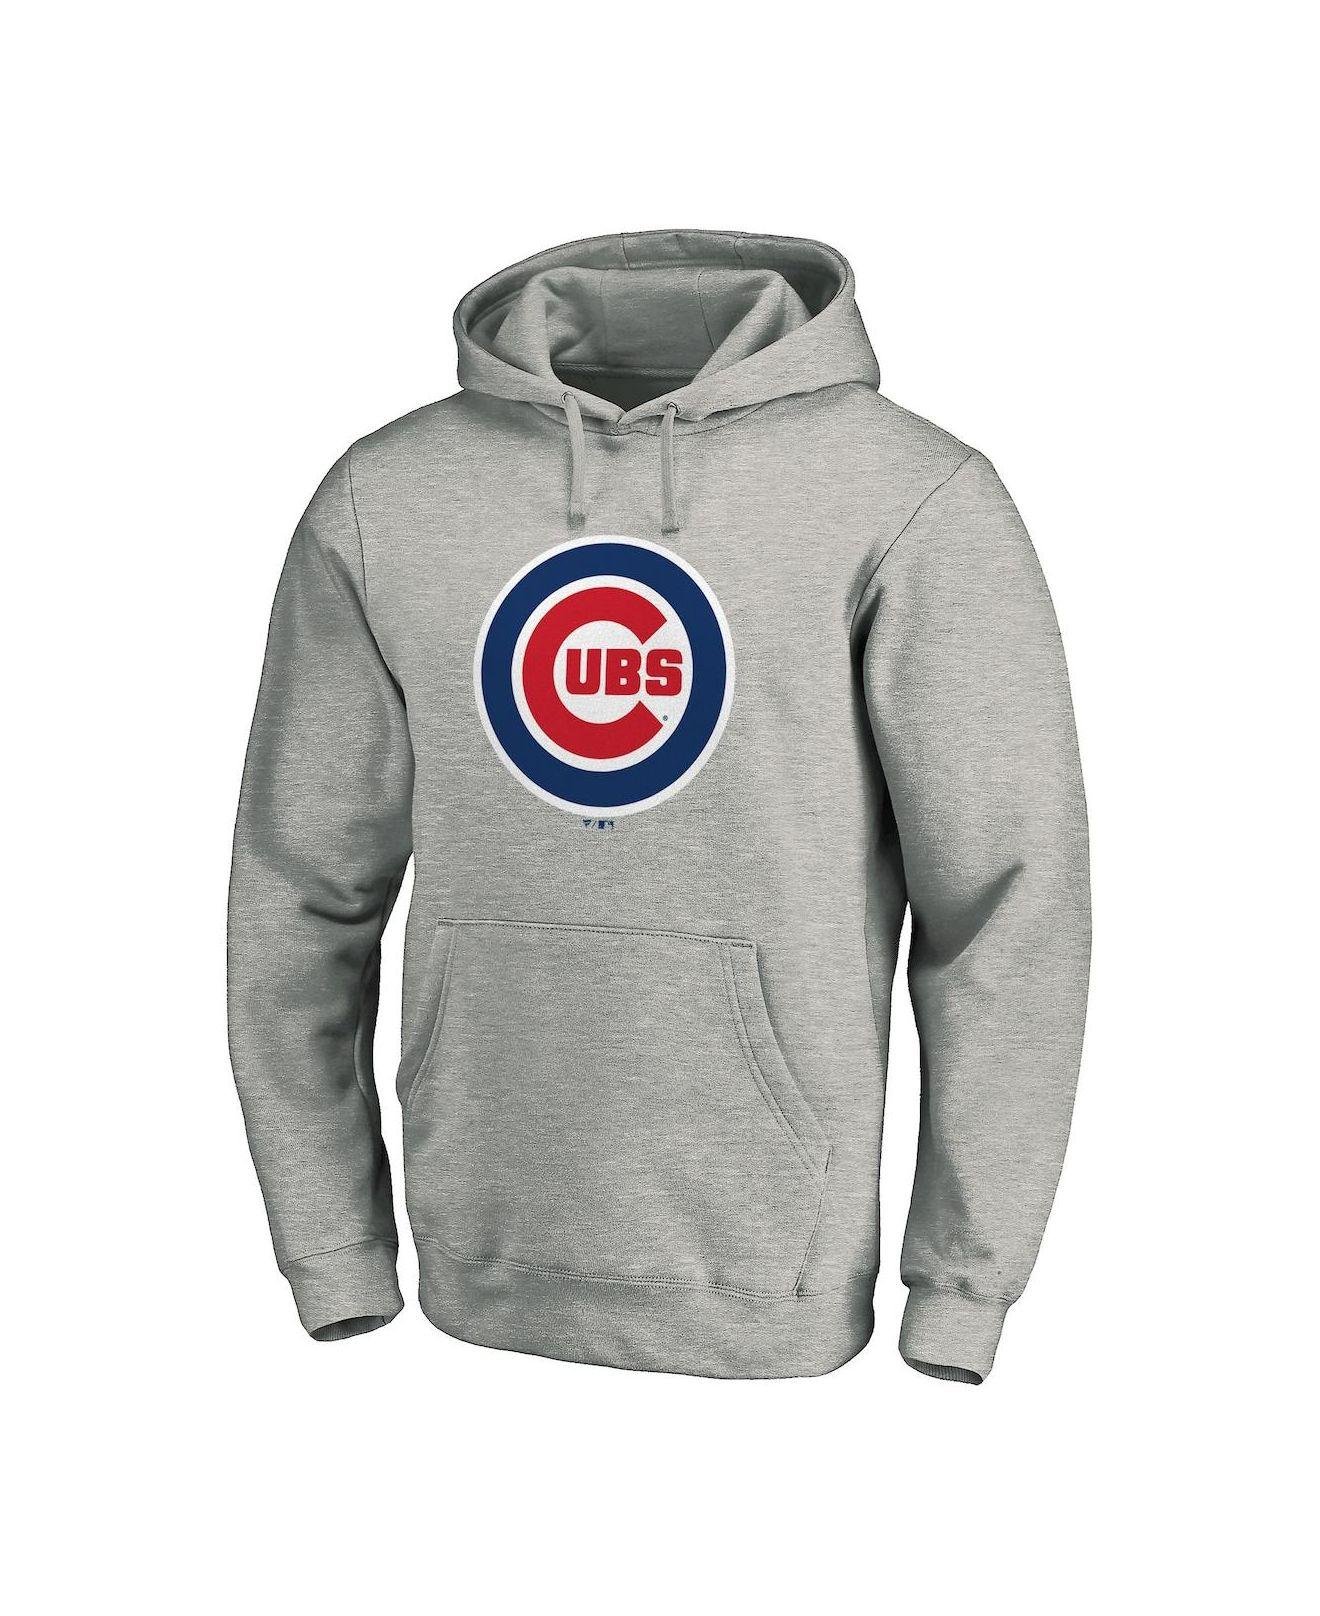 Fanatics Men's Big and Tall Heathered Gray Chicago Cubs